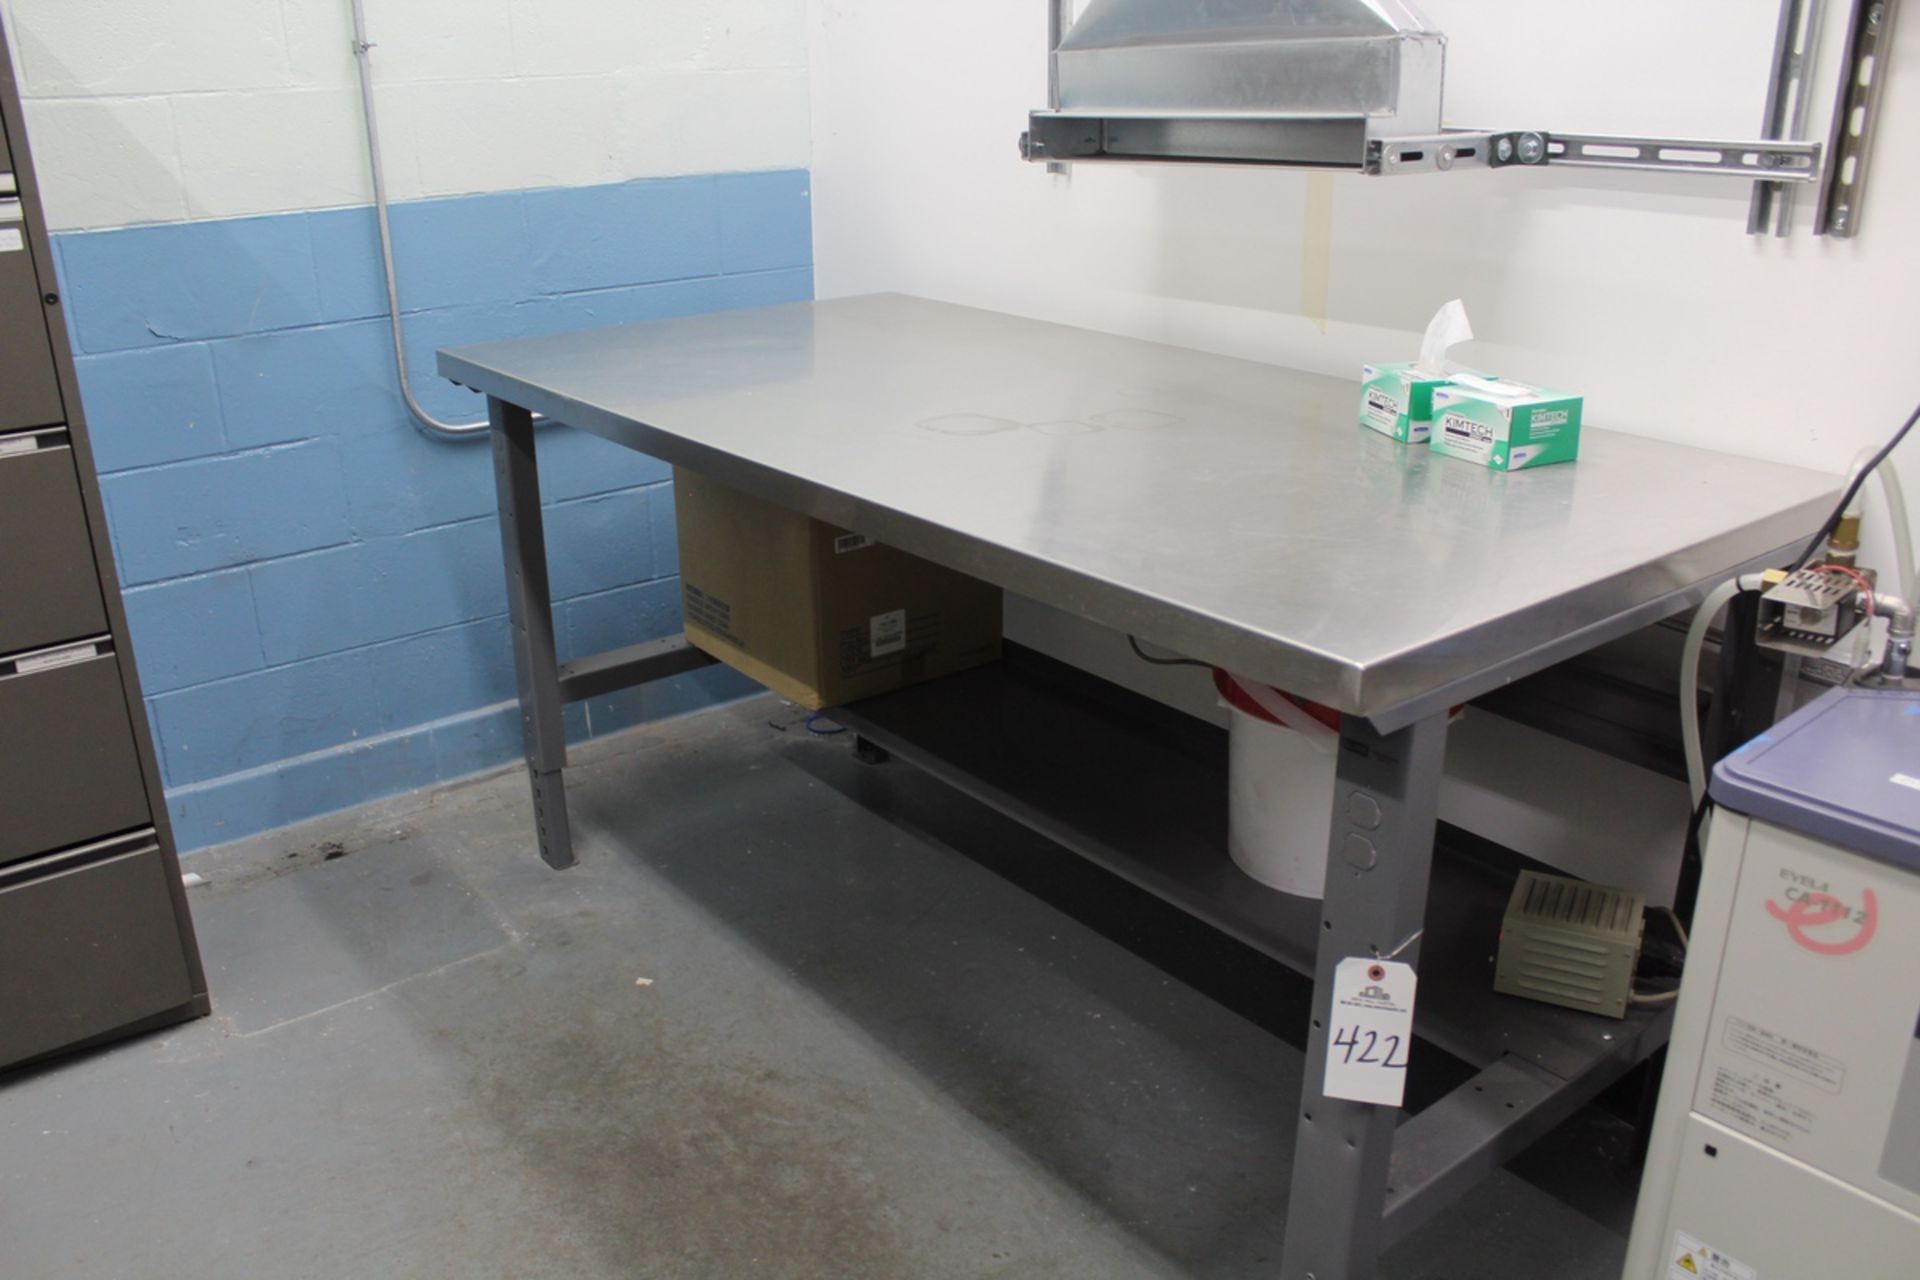 Stainless Steal Top Work Bench, 36" x 6' | Rig Fee $25